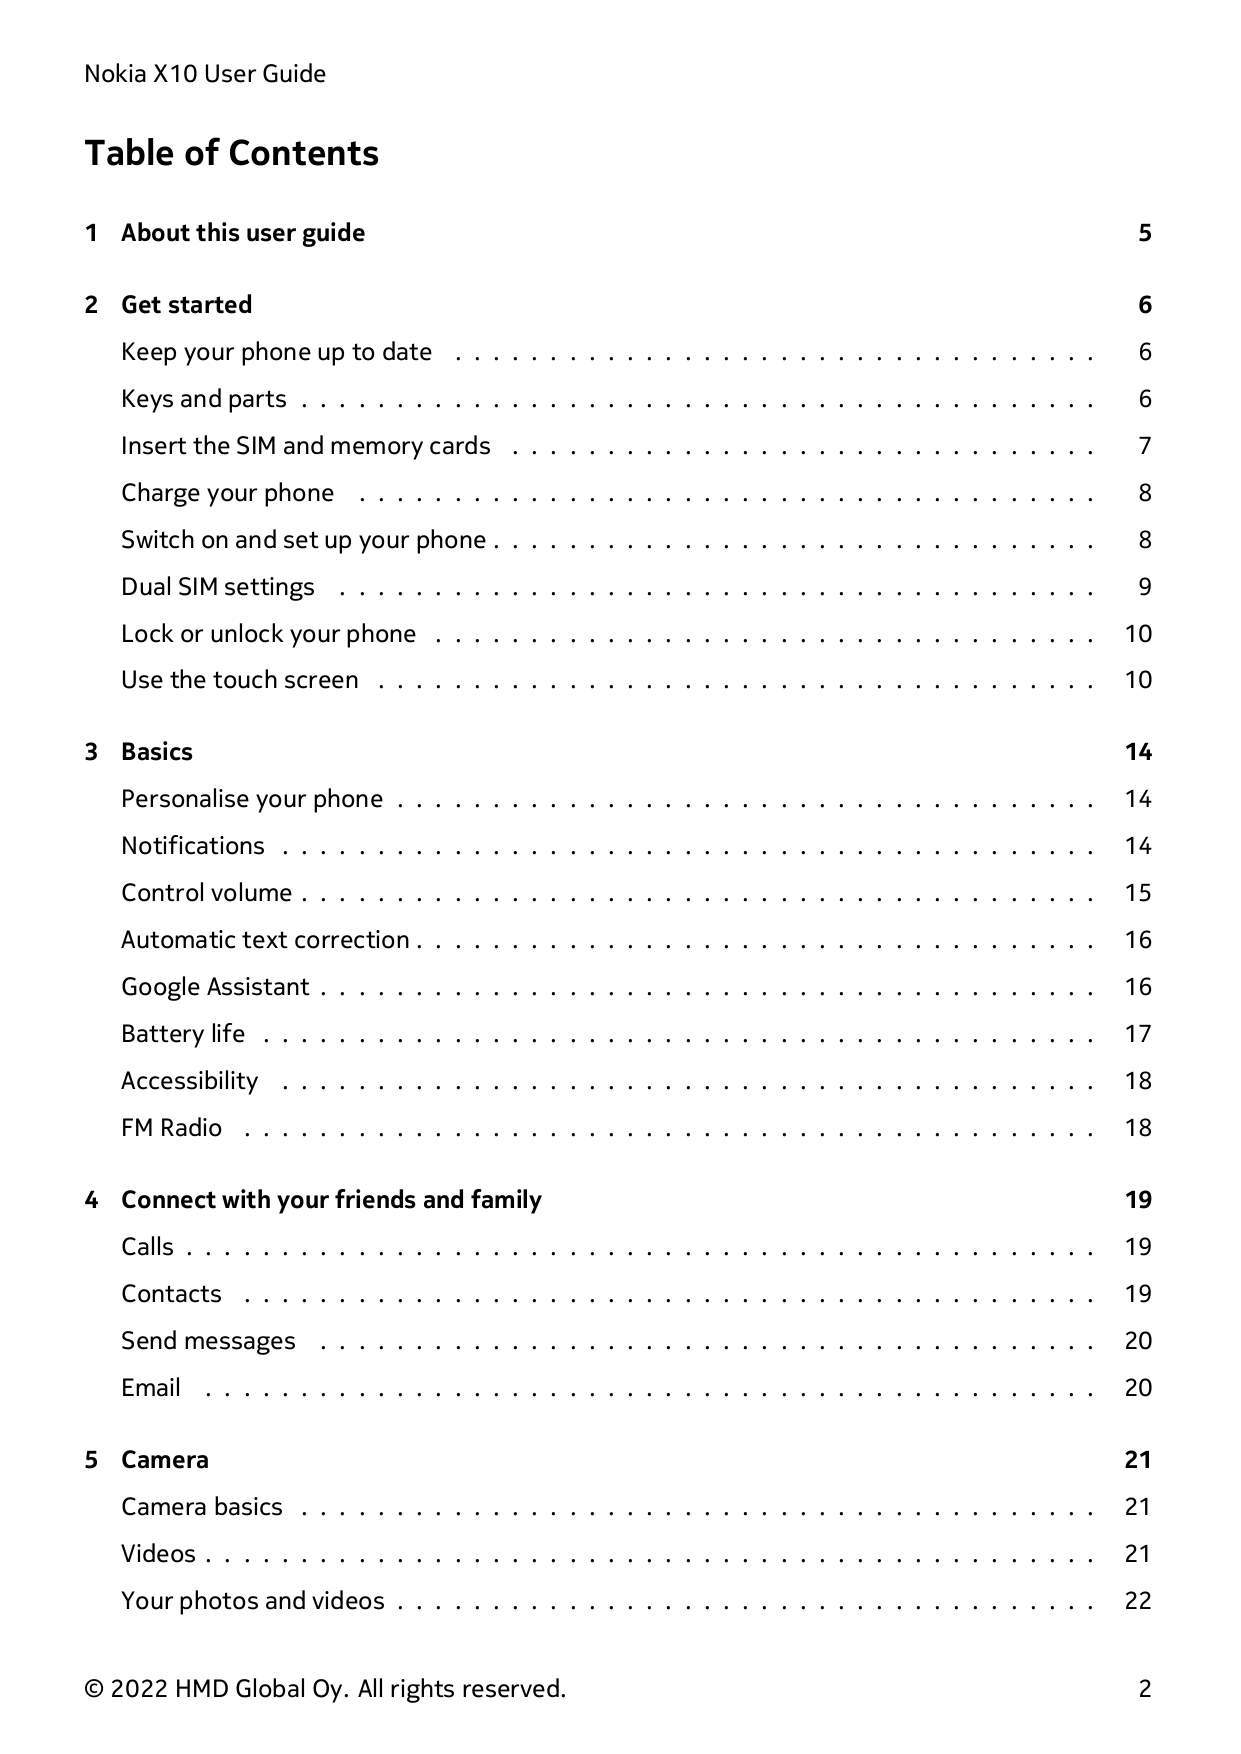 Nokia X10 User GuideTable of Contents1 About this user guide52 Get started6Keep your phone up to date . . . . . . . . . . . . . 